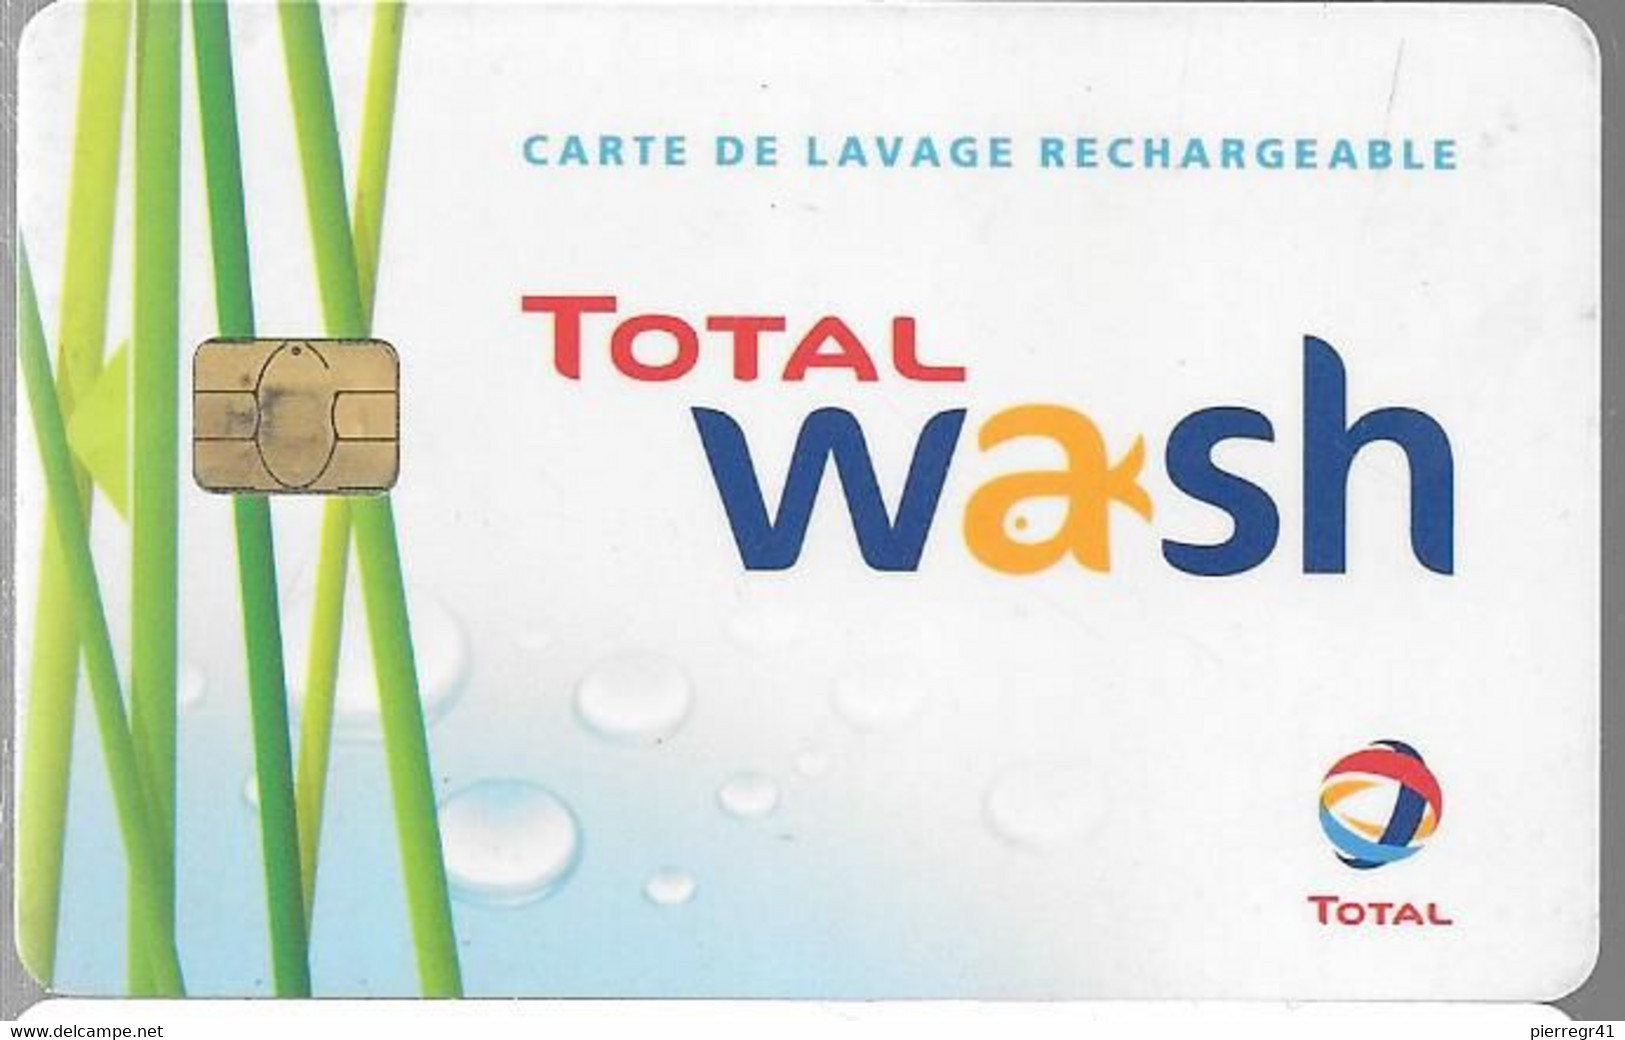 CARTE-PUCE-RECHARGEABLE-LAVAGE-TOTAL WASH-TBE - Car Wash